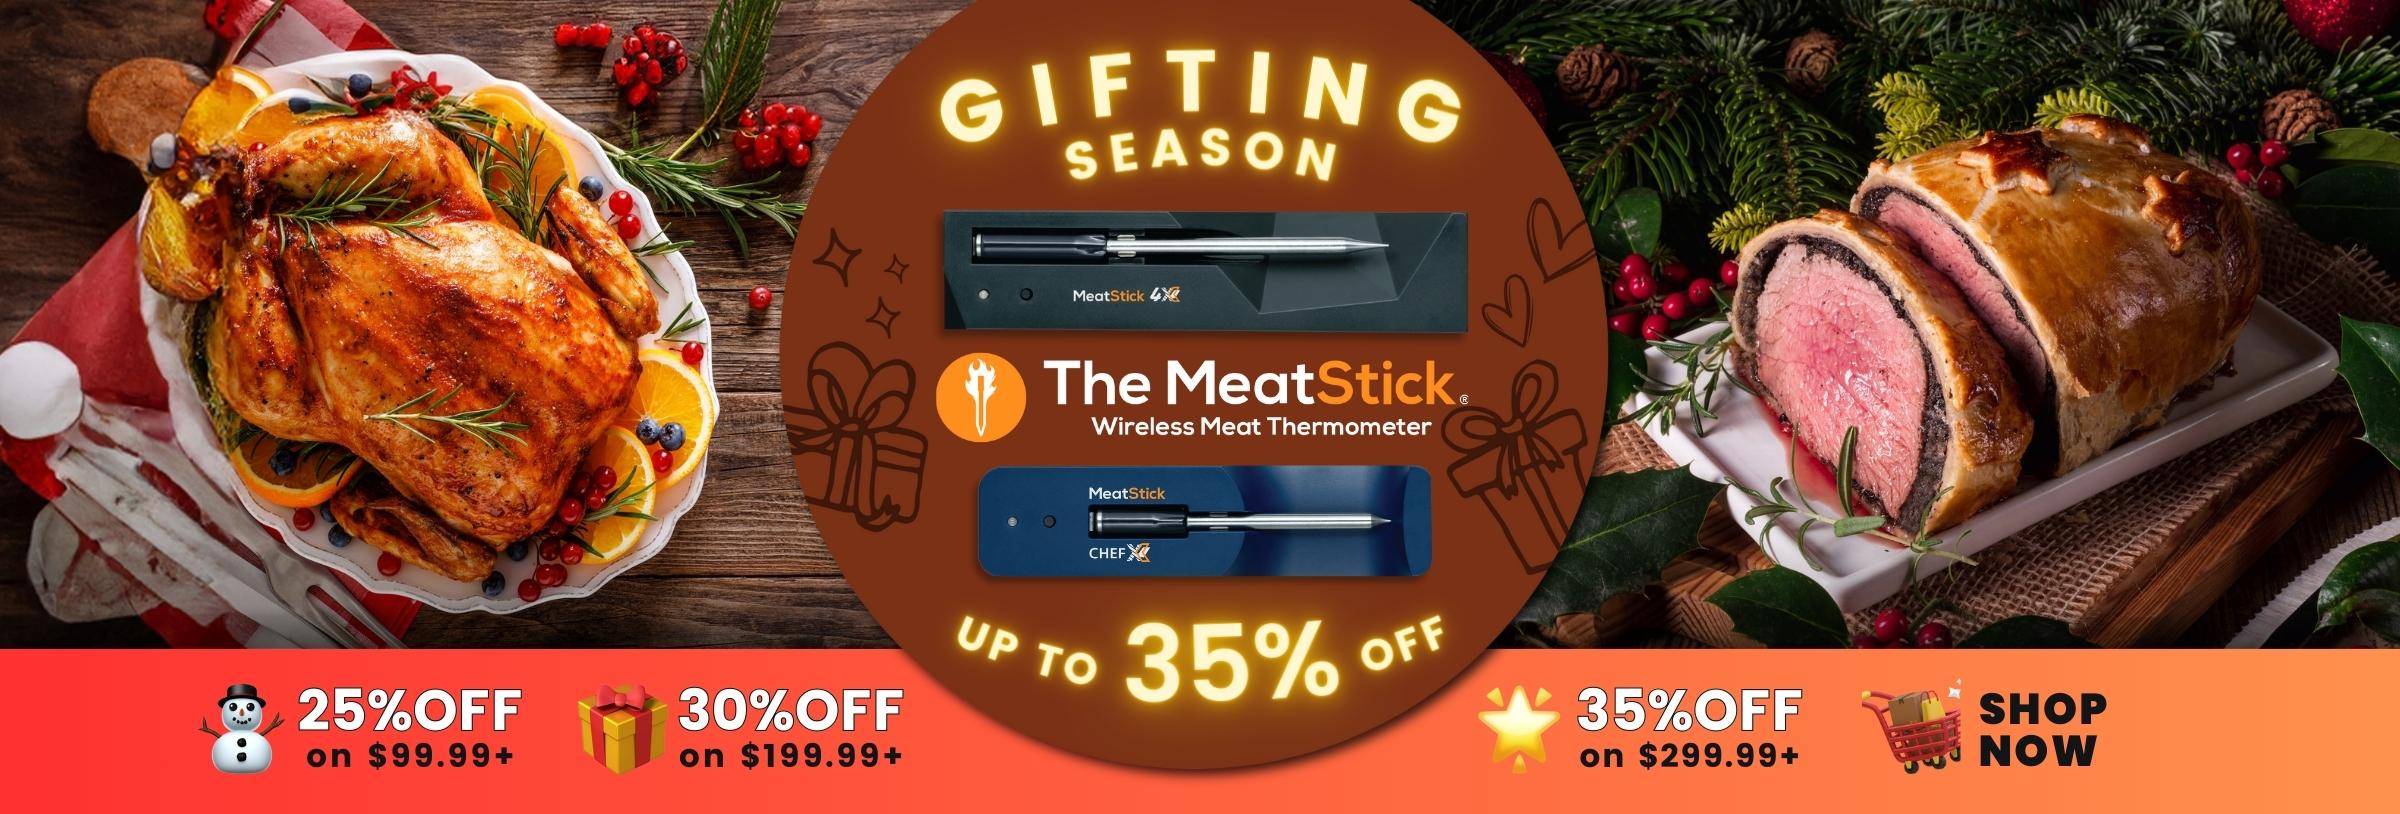 The MeatStick Wireless Meat Thermometer: Sitewide Holiday Sale up to 35% Off